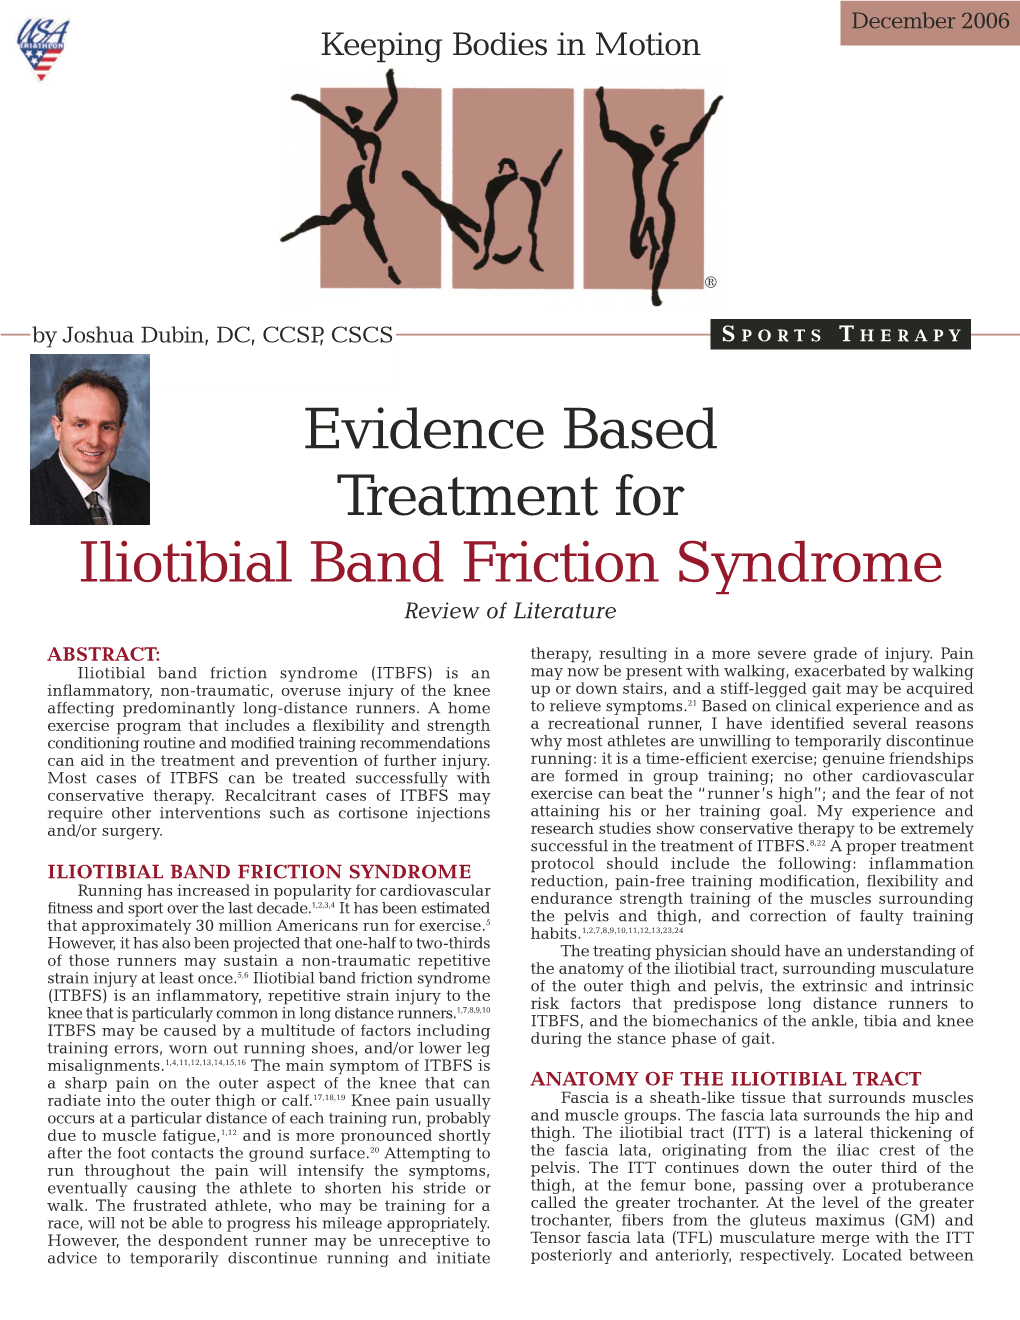 Evidence Based Treatment for Iliotibial Band Friction Syndrome Review of Literature